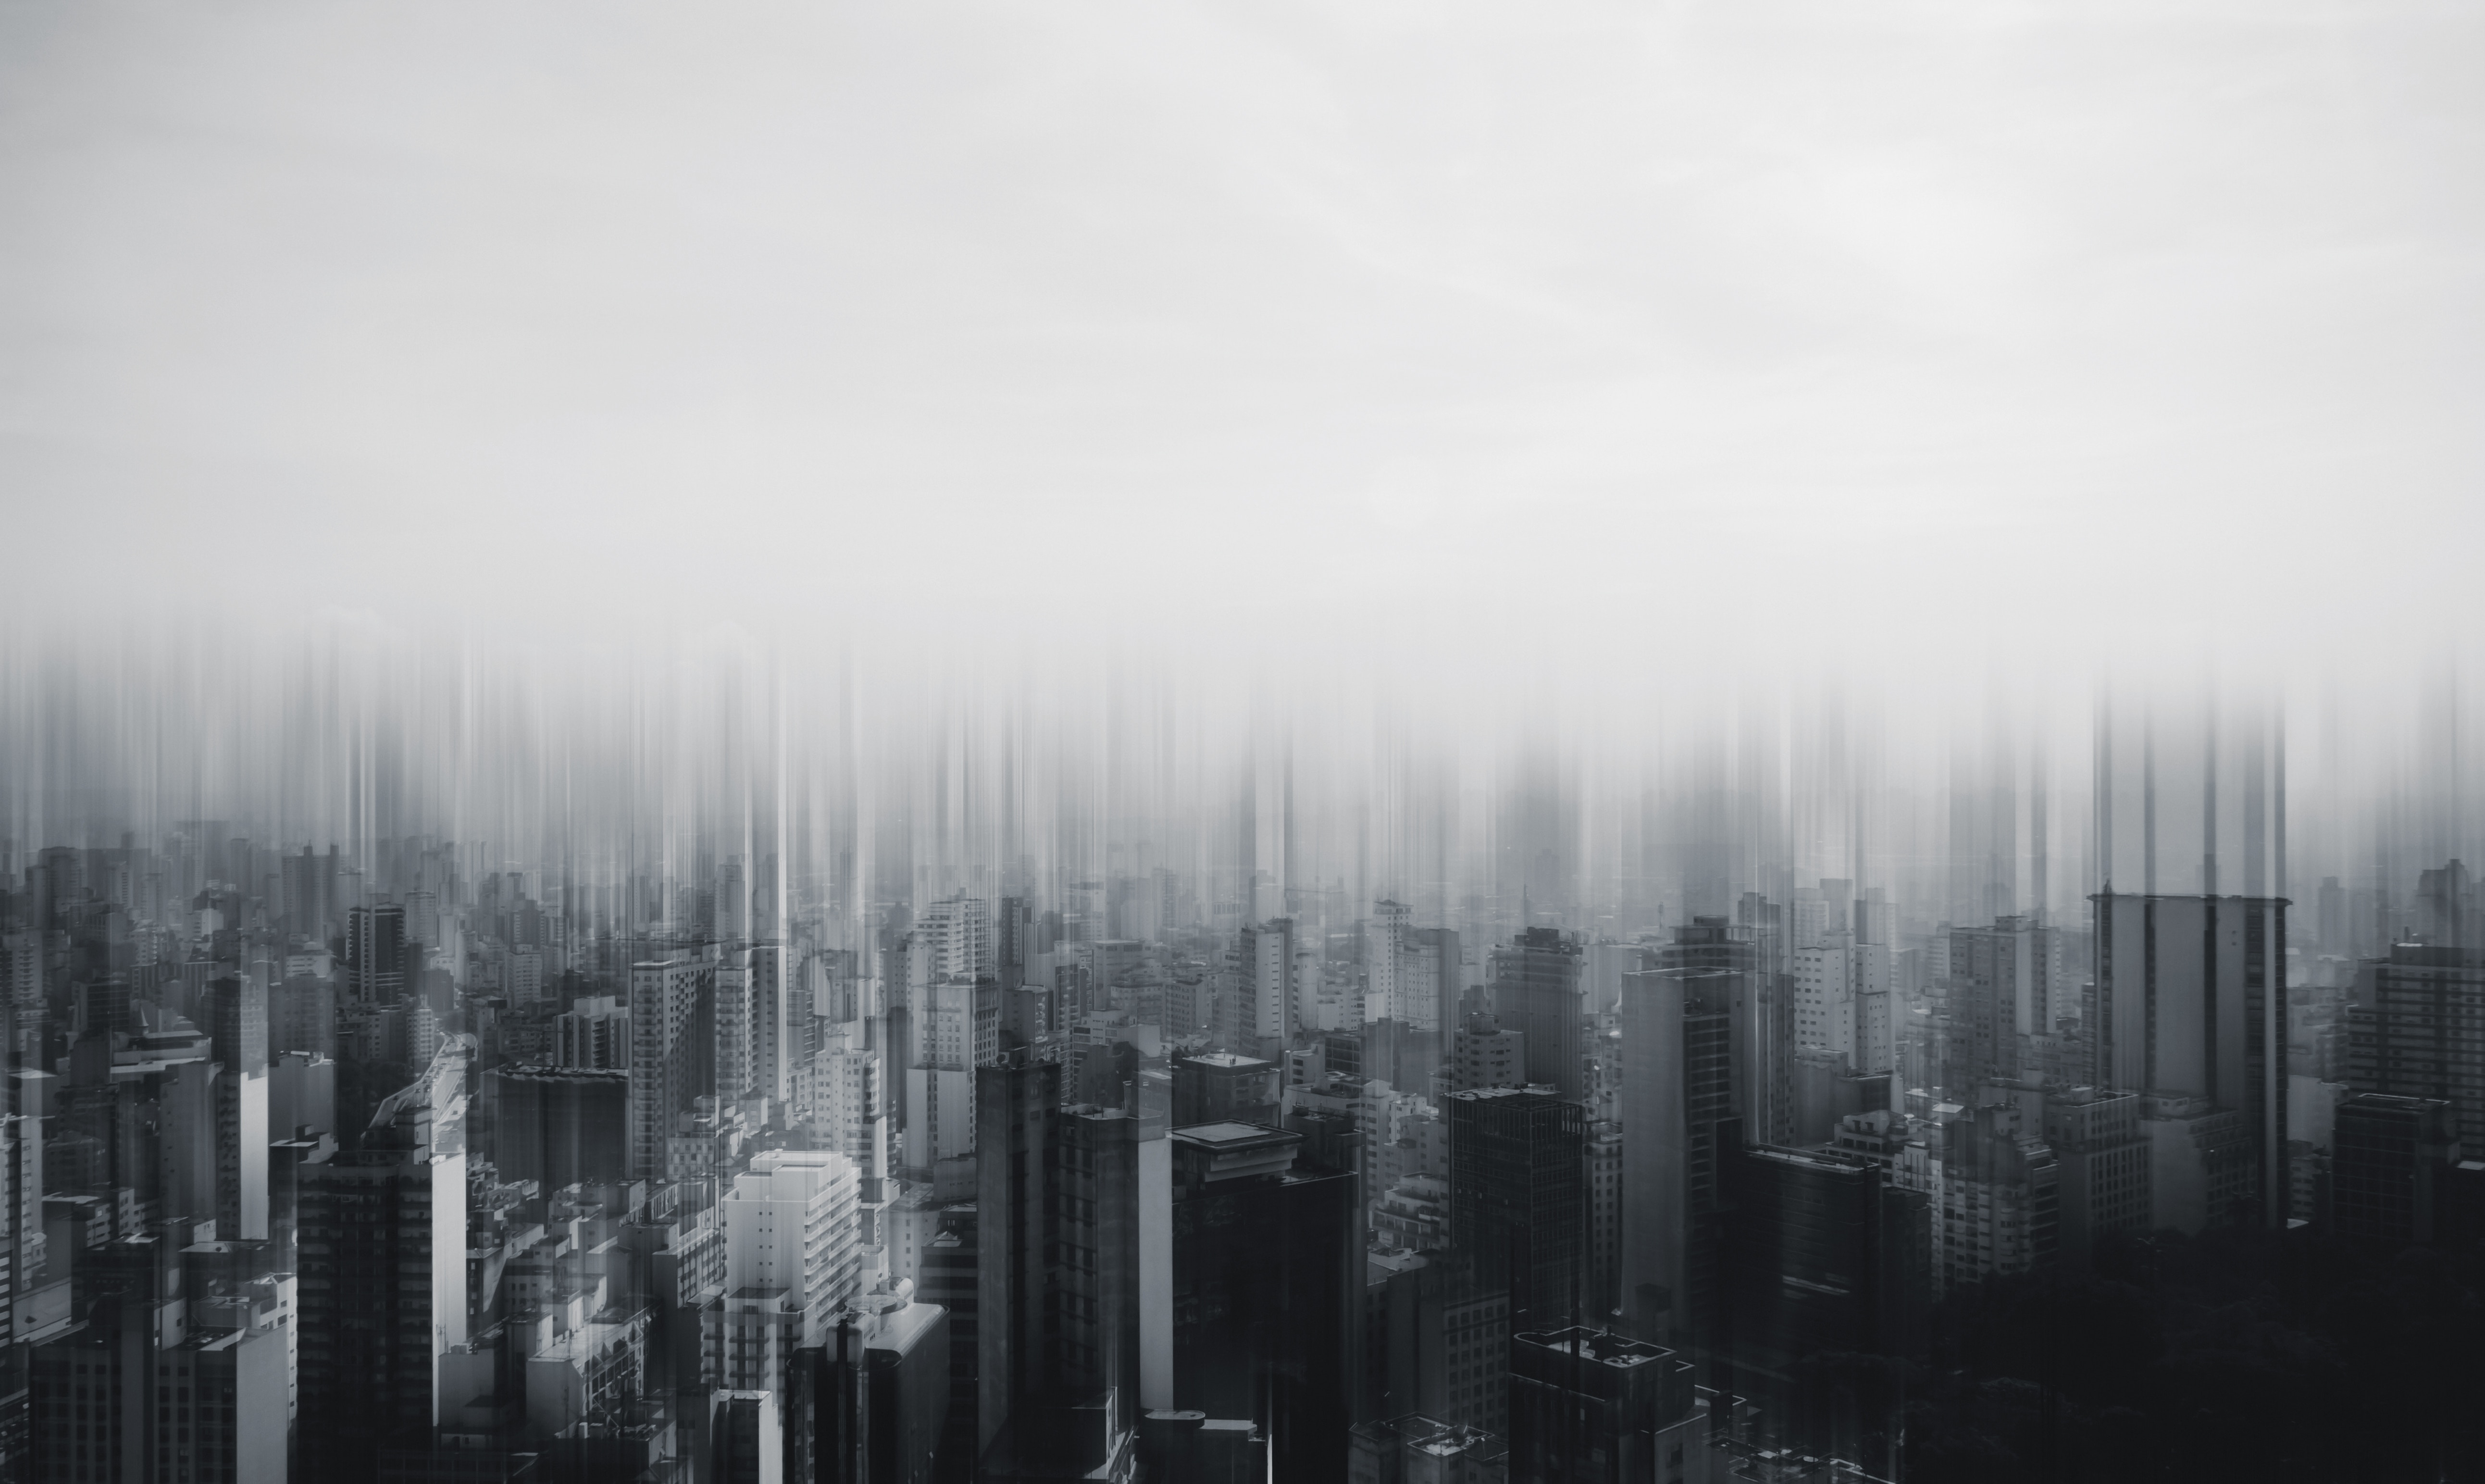 5170x3088 mist, window, black and white, brazil, buildings, gray, sky, sao paulo, cloud, abstract, urban, Free image, cityscape, car, architecture, city, street, fog, grey, building Gallery HD Wallpaper